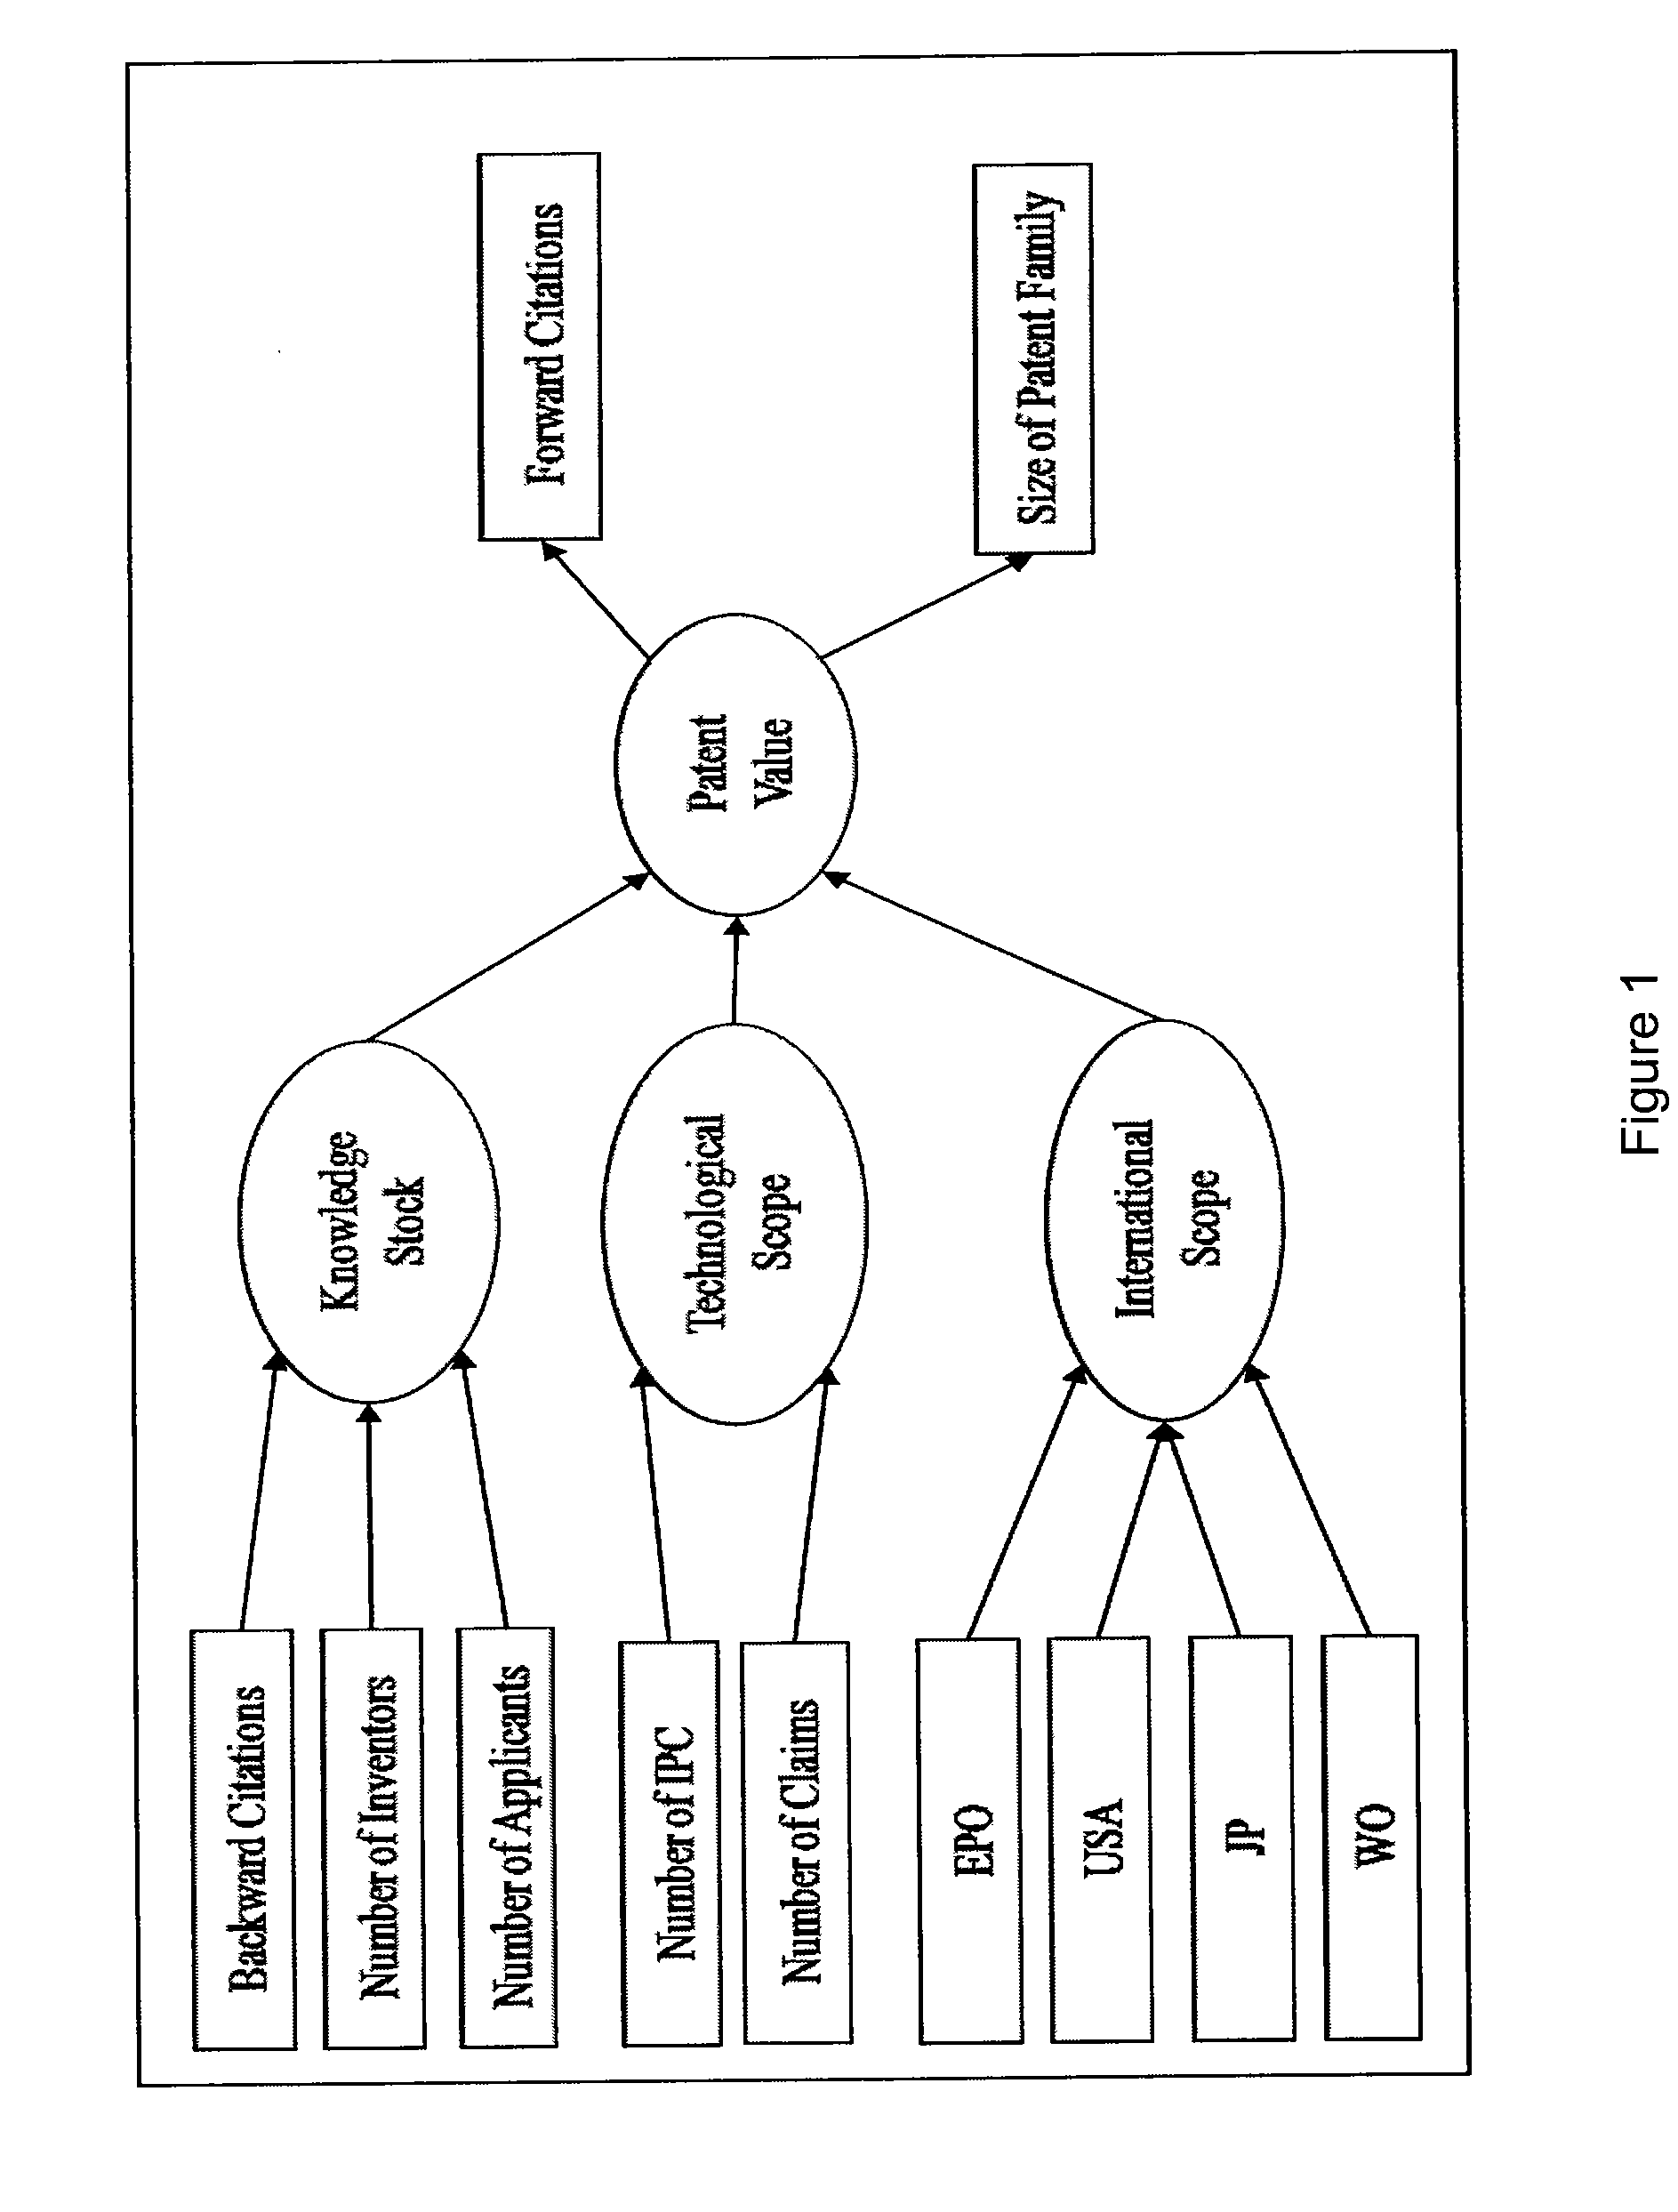 Multidimensional method and computer system for patent and technology portfolio rating and related database